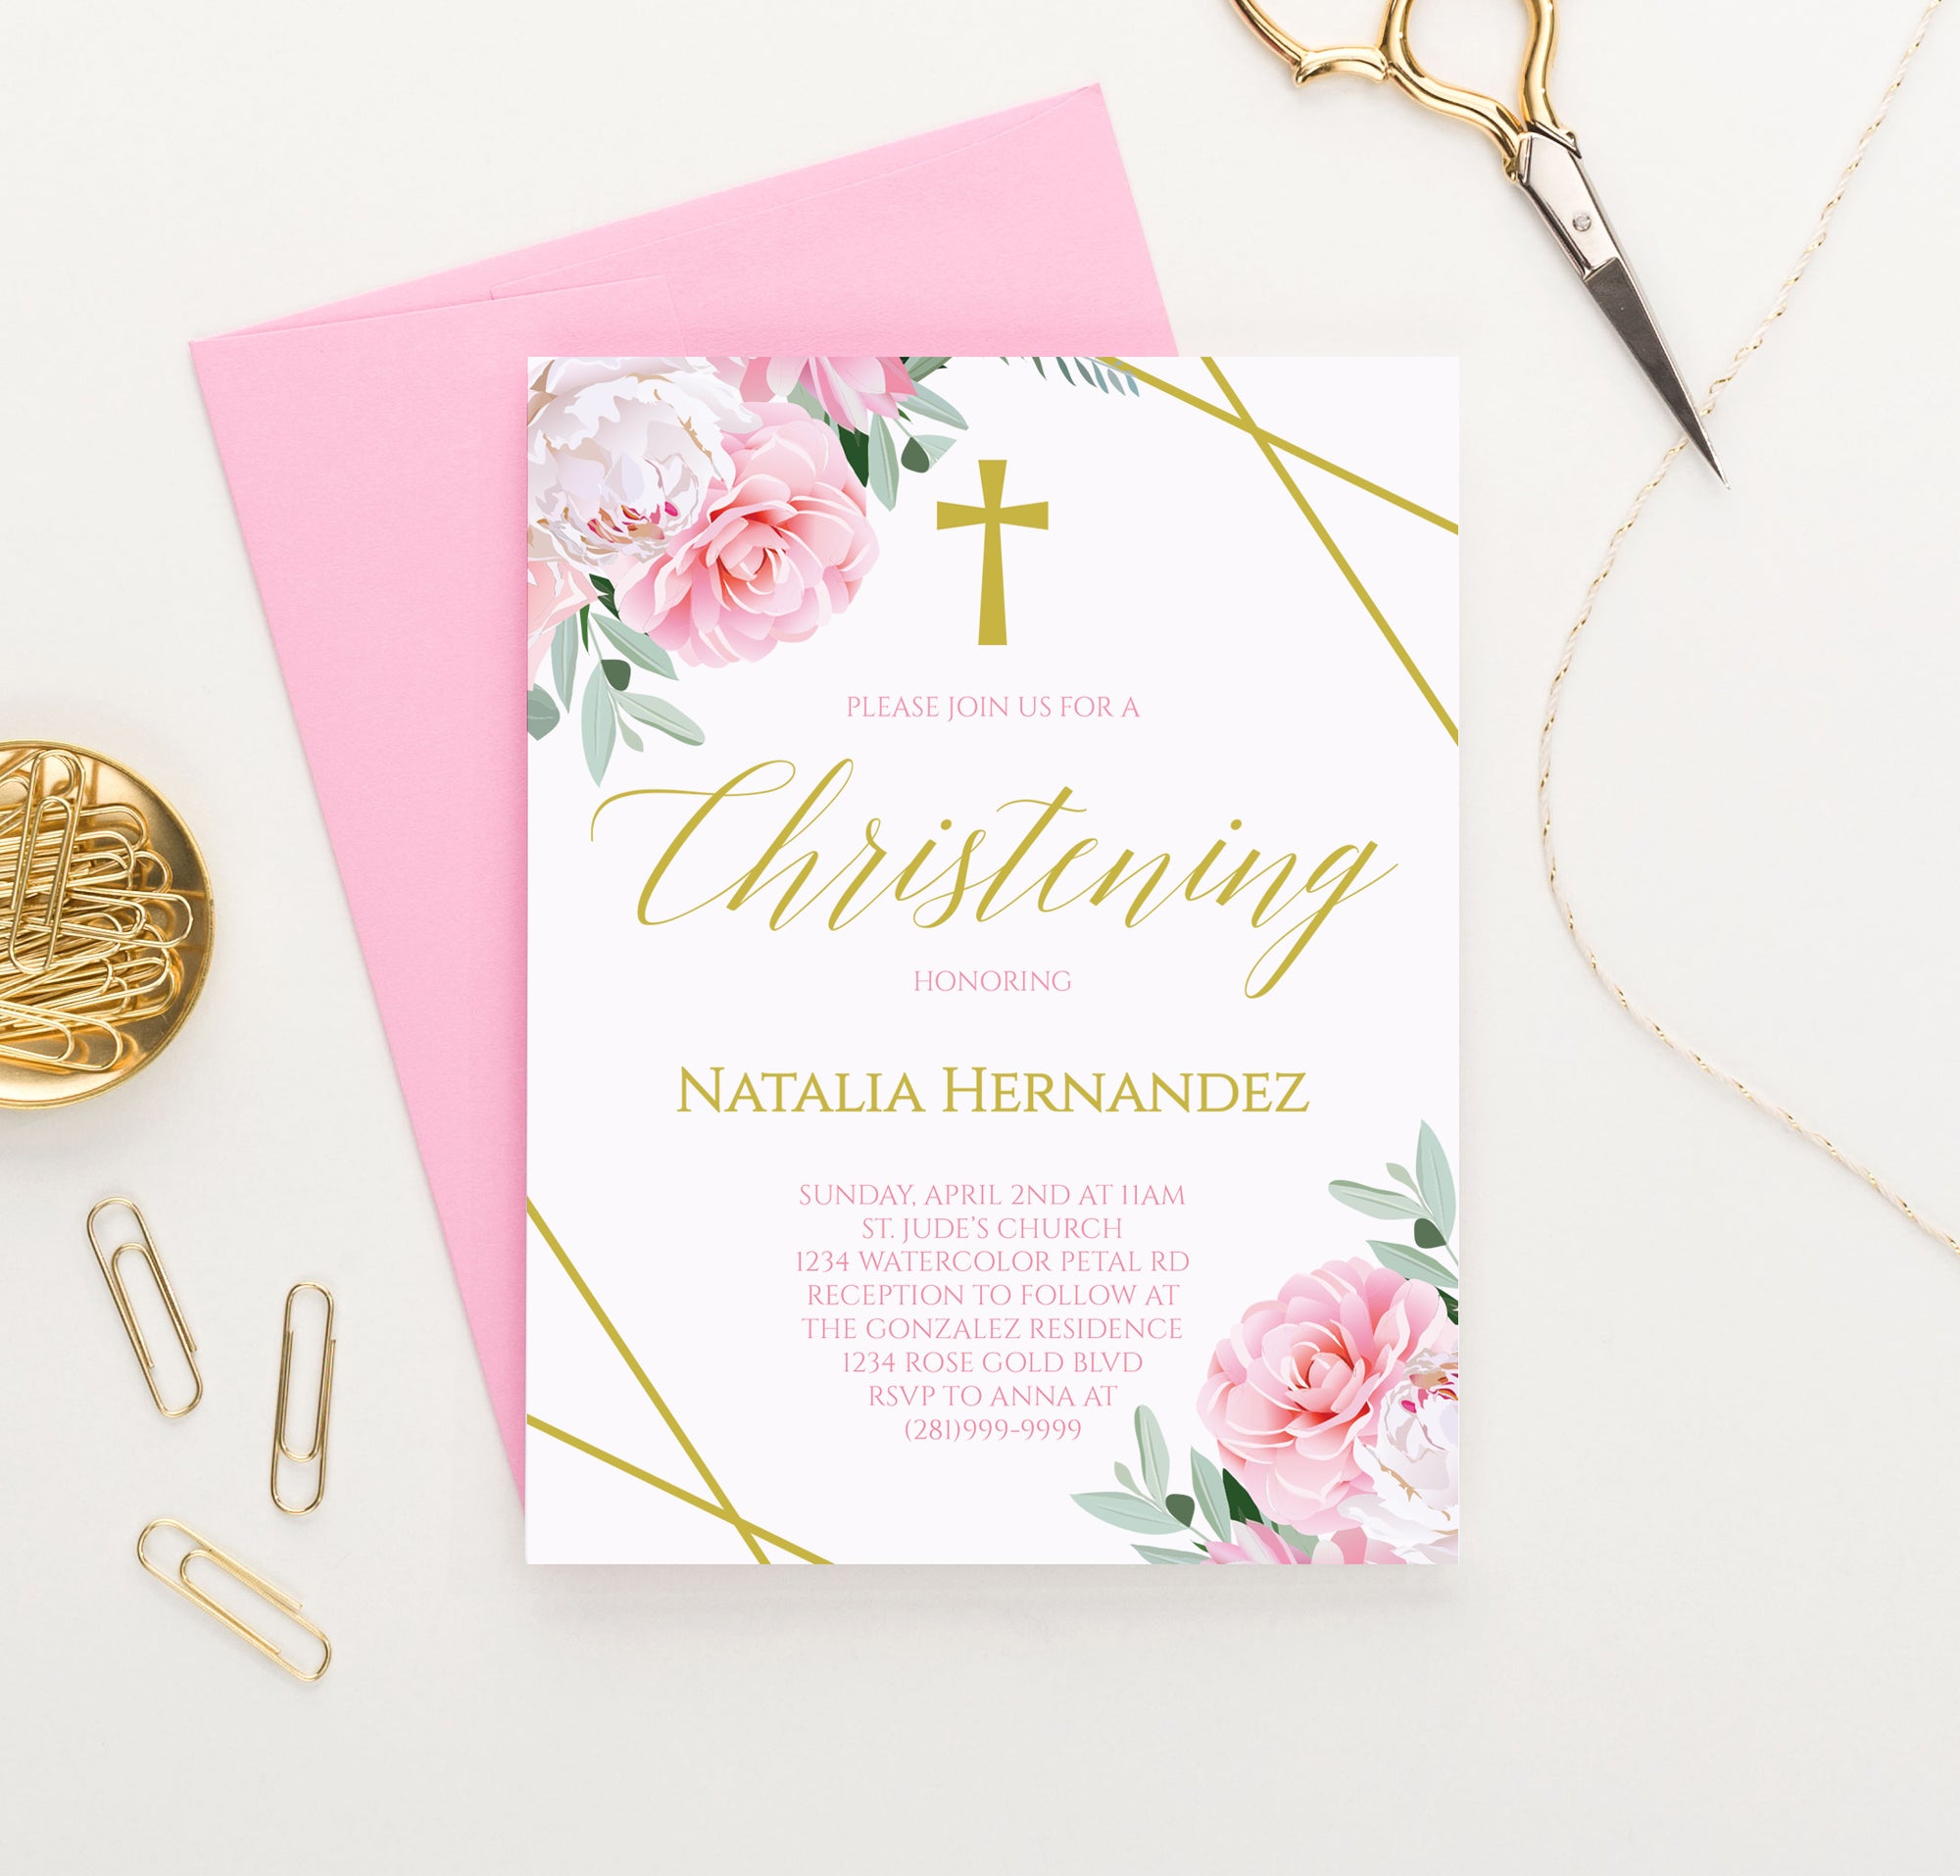 Personalized Pink And Gold Christening Invitations With Floral Corners